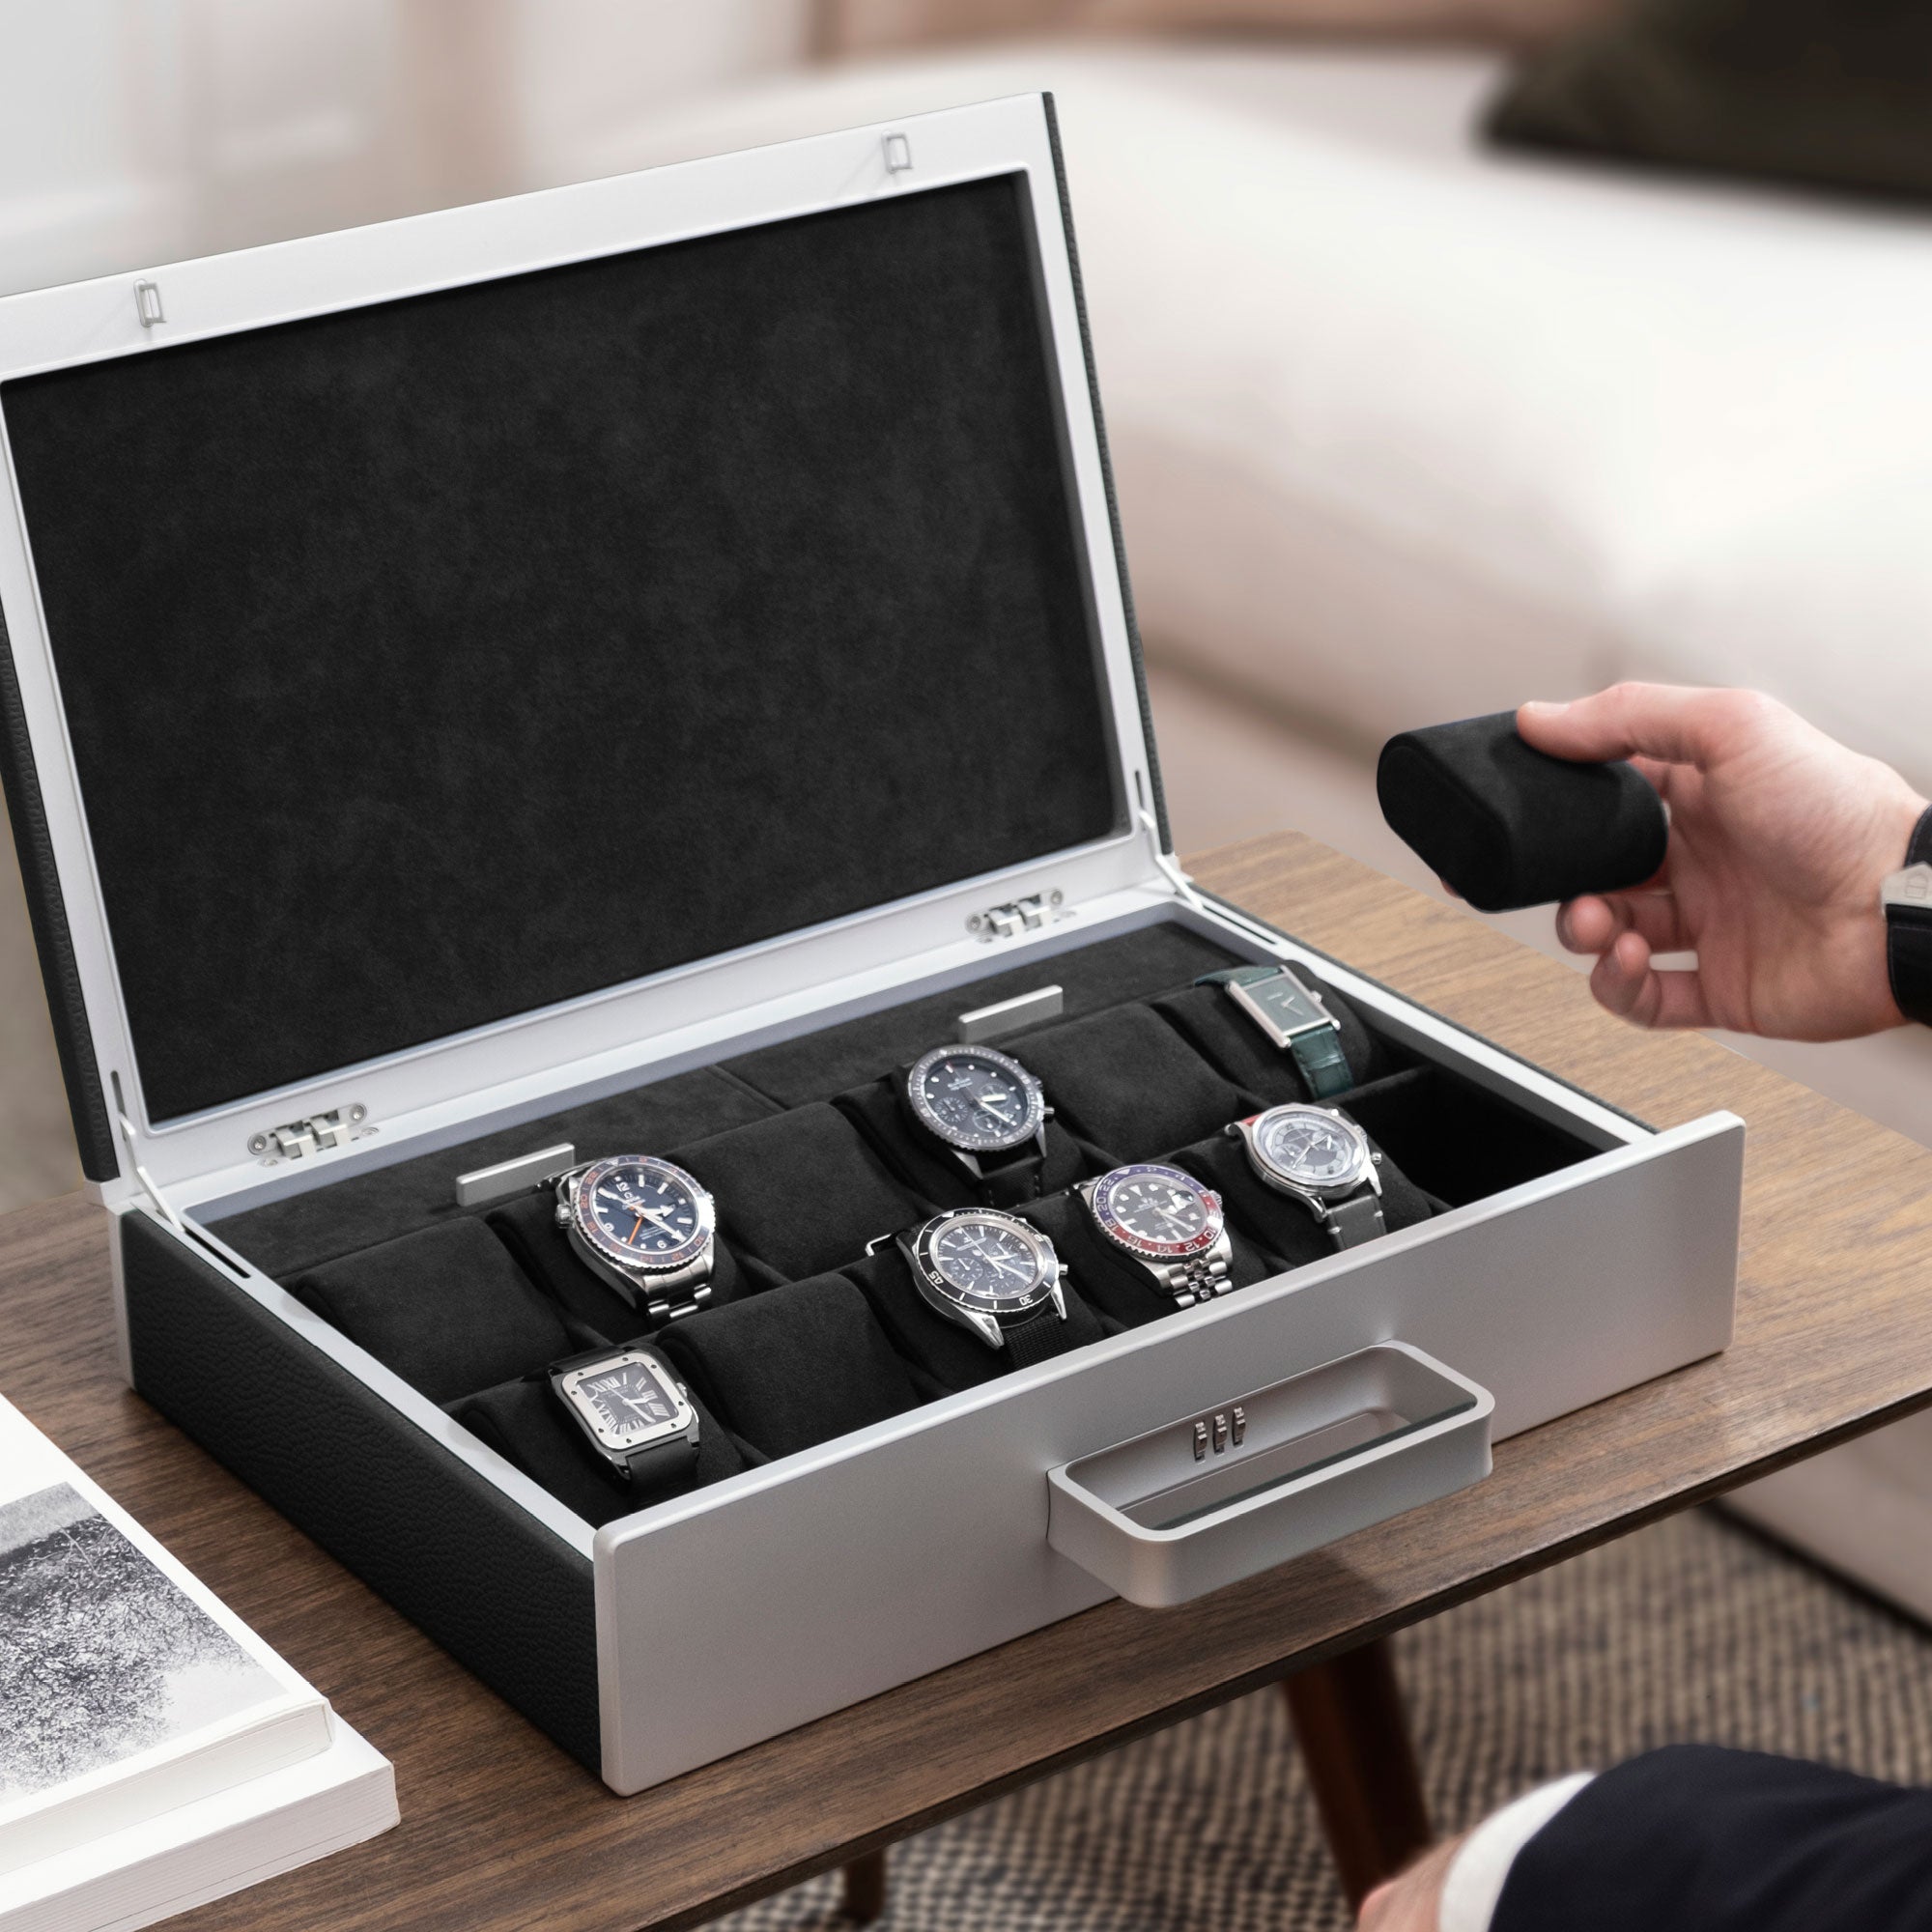 Lifestyle shot of open Mackenzie 12 Watch briefcase in carbon fiber and grey anodized aluminum casing, black leather and soft notte Alcantara made by hand filled with luxury watches including Rolex, Jaeger-LeCoultre, Blancpain and Omega